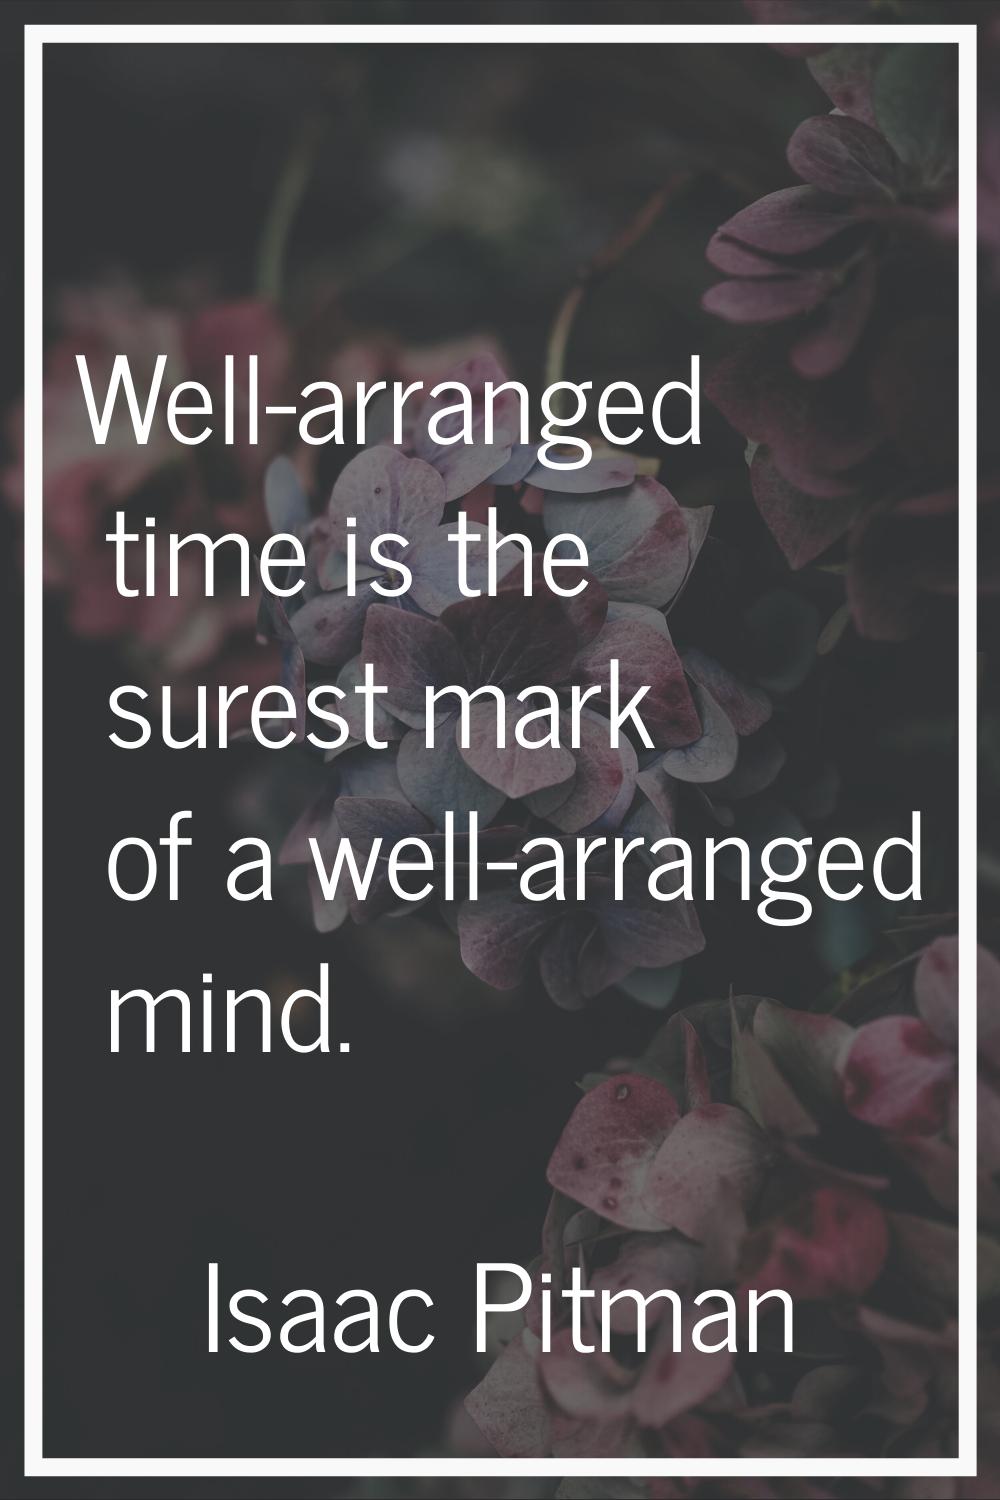 Well-arranged time is the surest mark of a well-arranged mind.